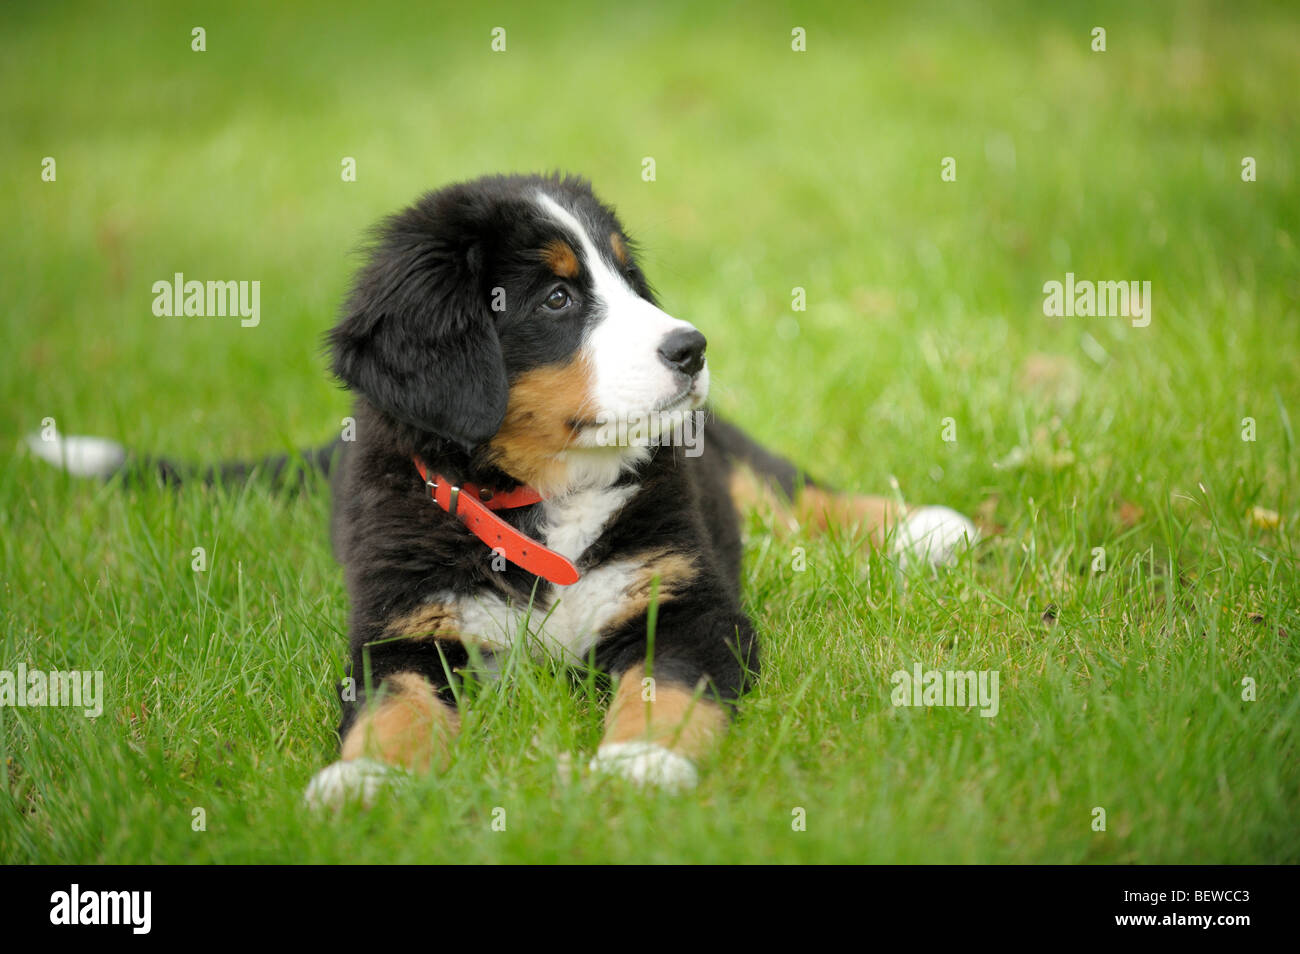 Bernese mountain dog puppy lying on a meadow Stock Photo